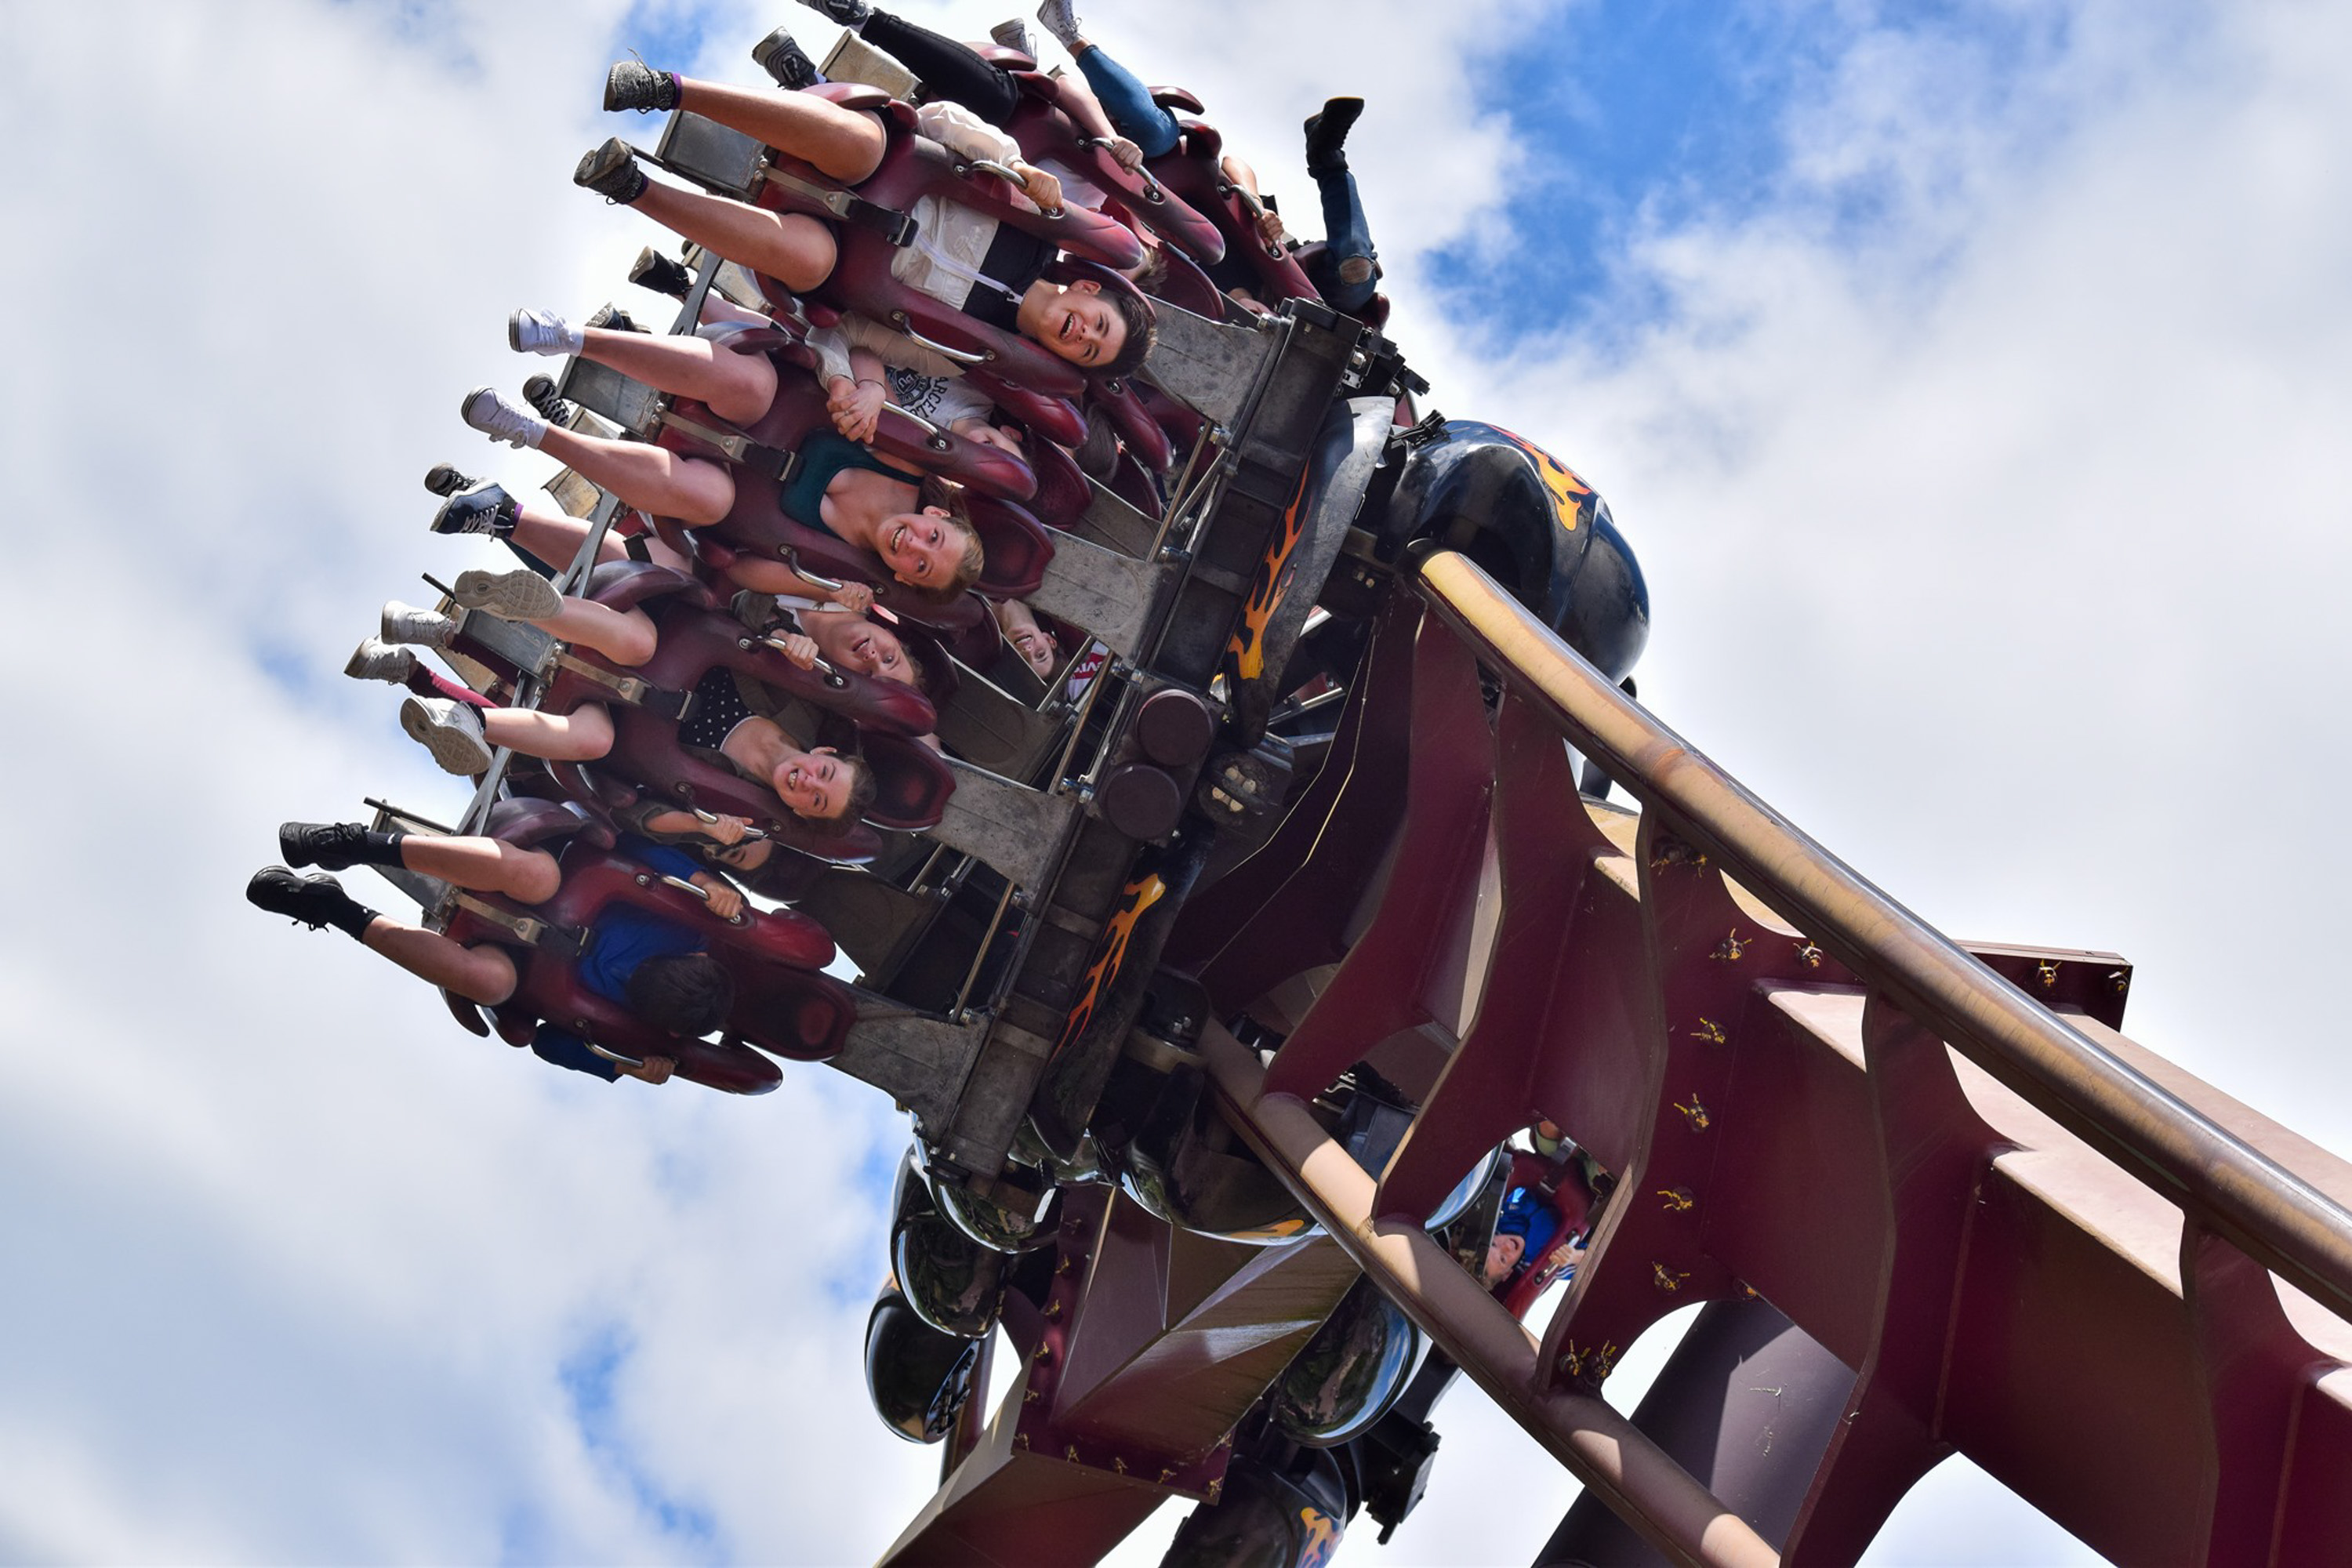 Thorpe Park Installs Automatic Number Plate Recognition System